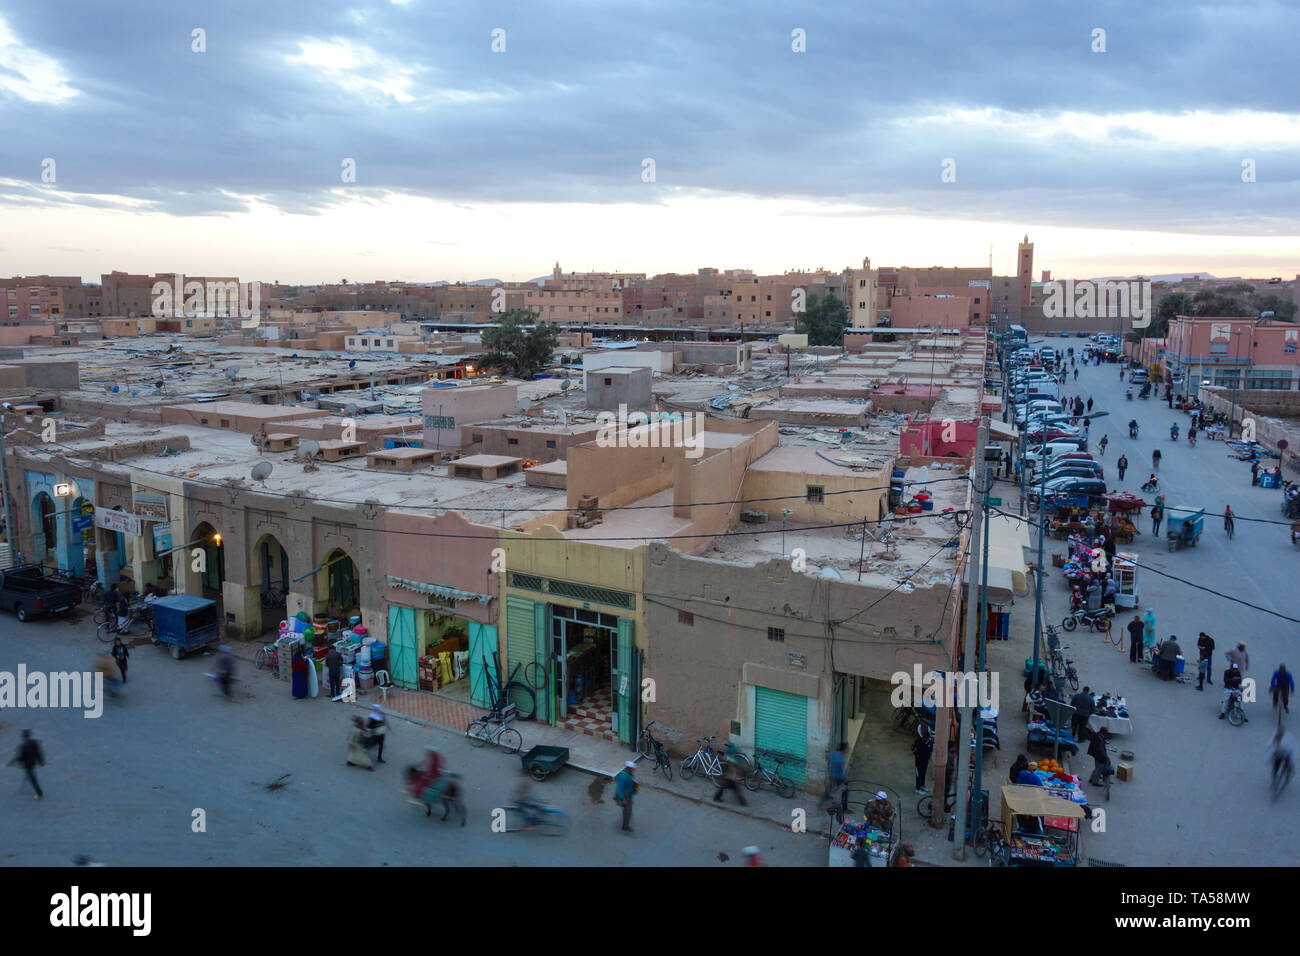 Rissani, Morocco - March 21st, 2019: A view down onto the main street with busy locals during sunset. Stock Photo